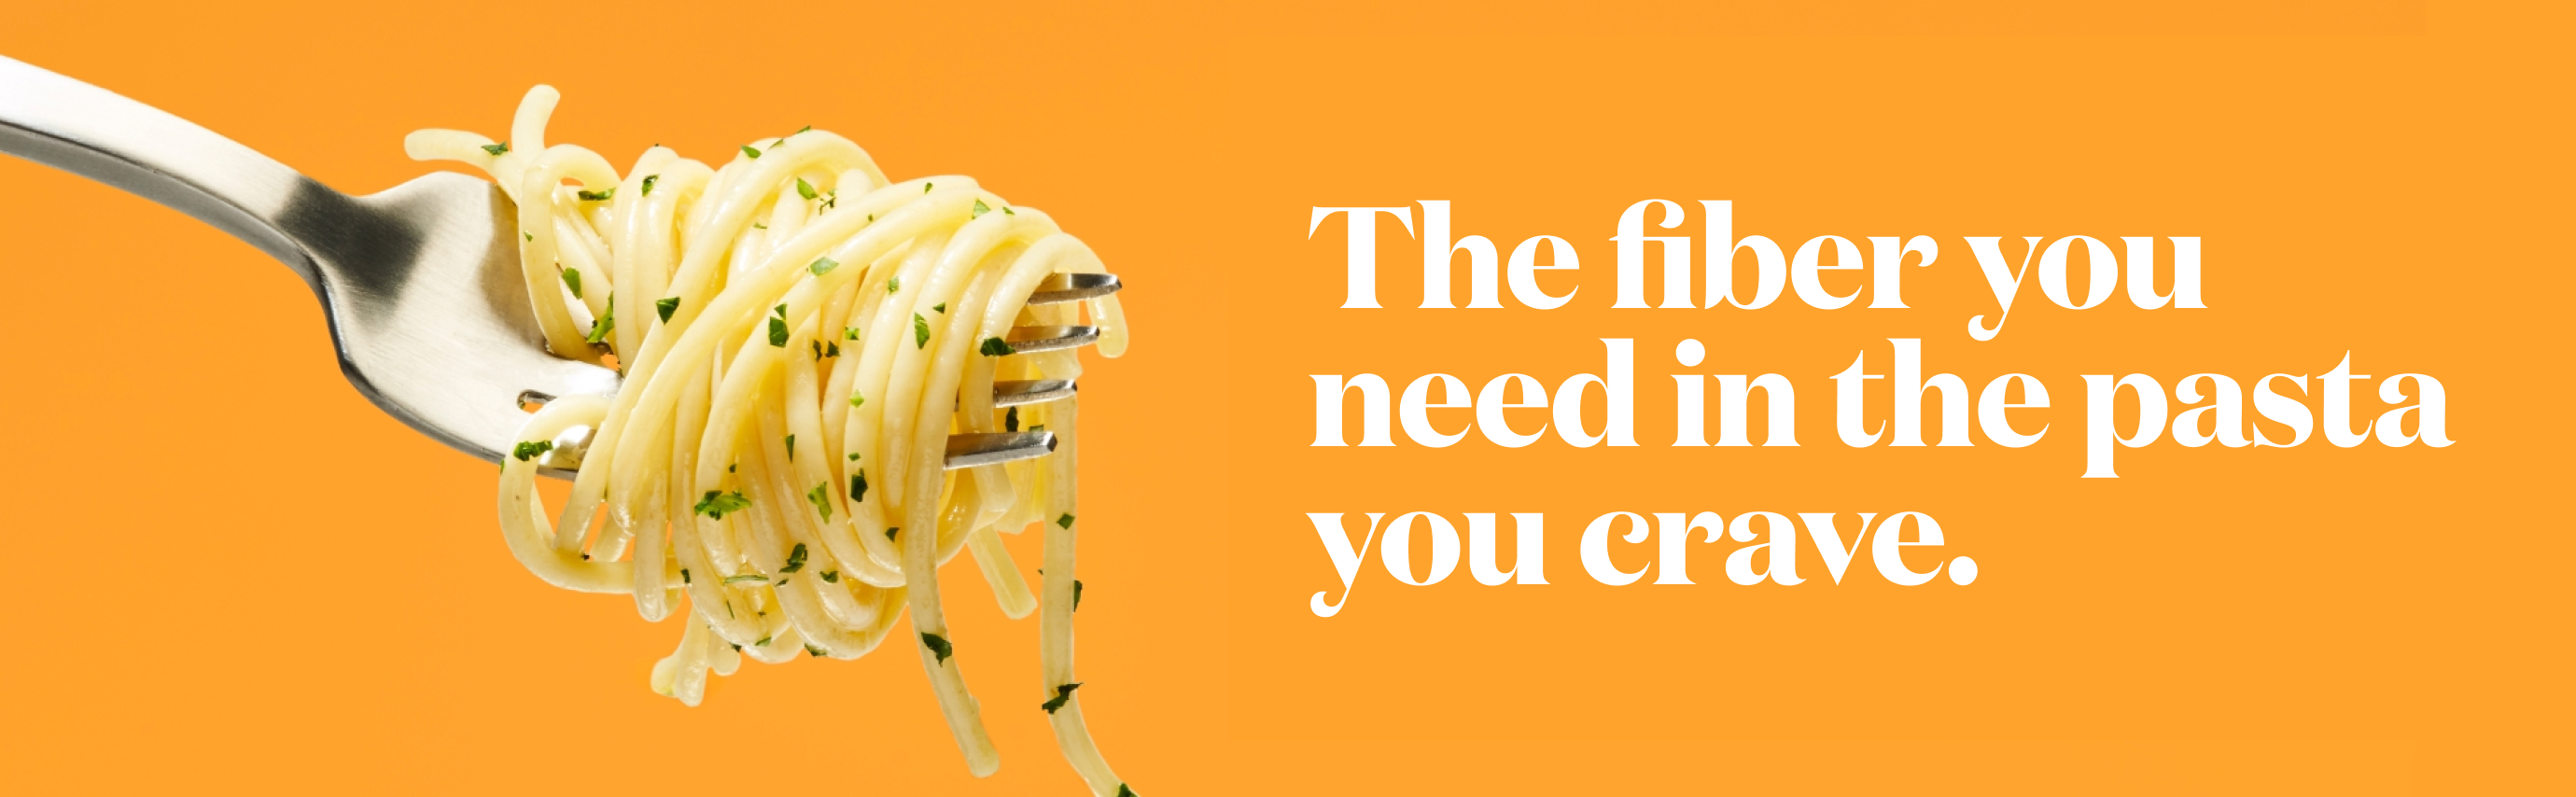 The fiber you need in the pasta you crave.